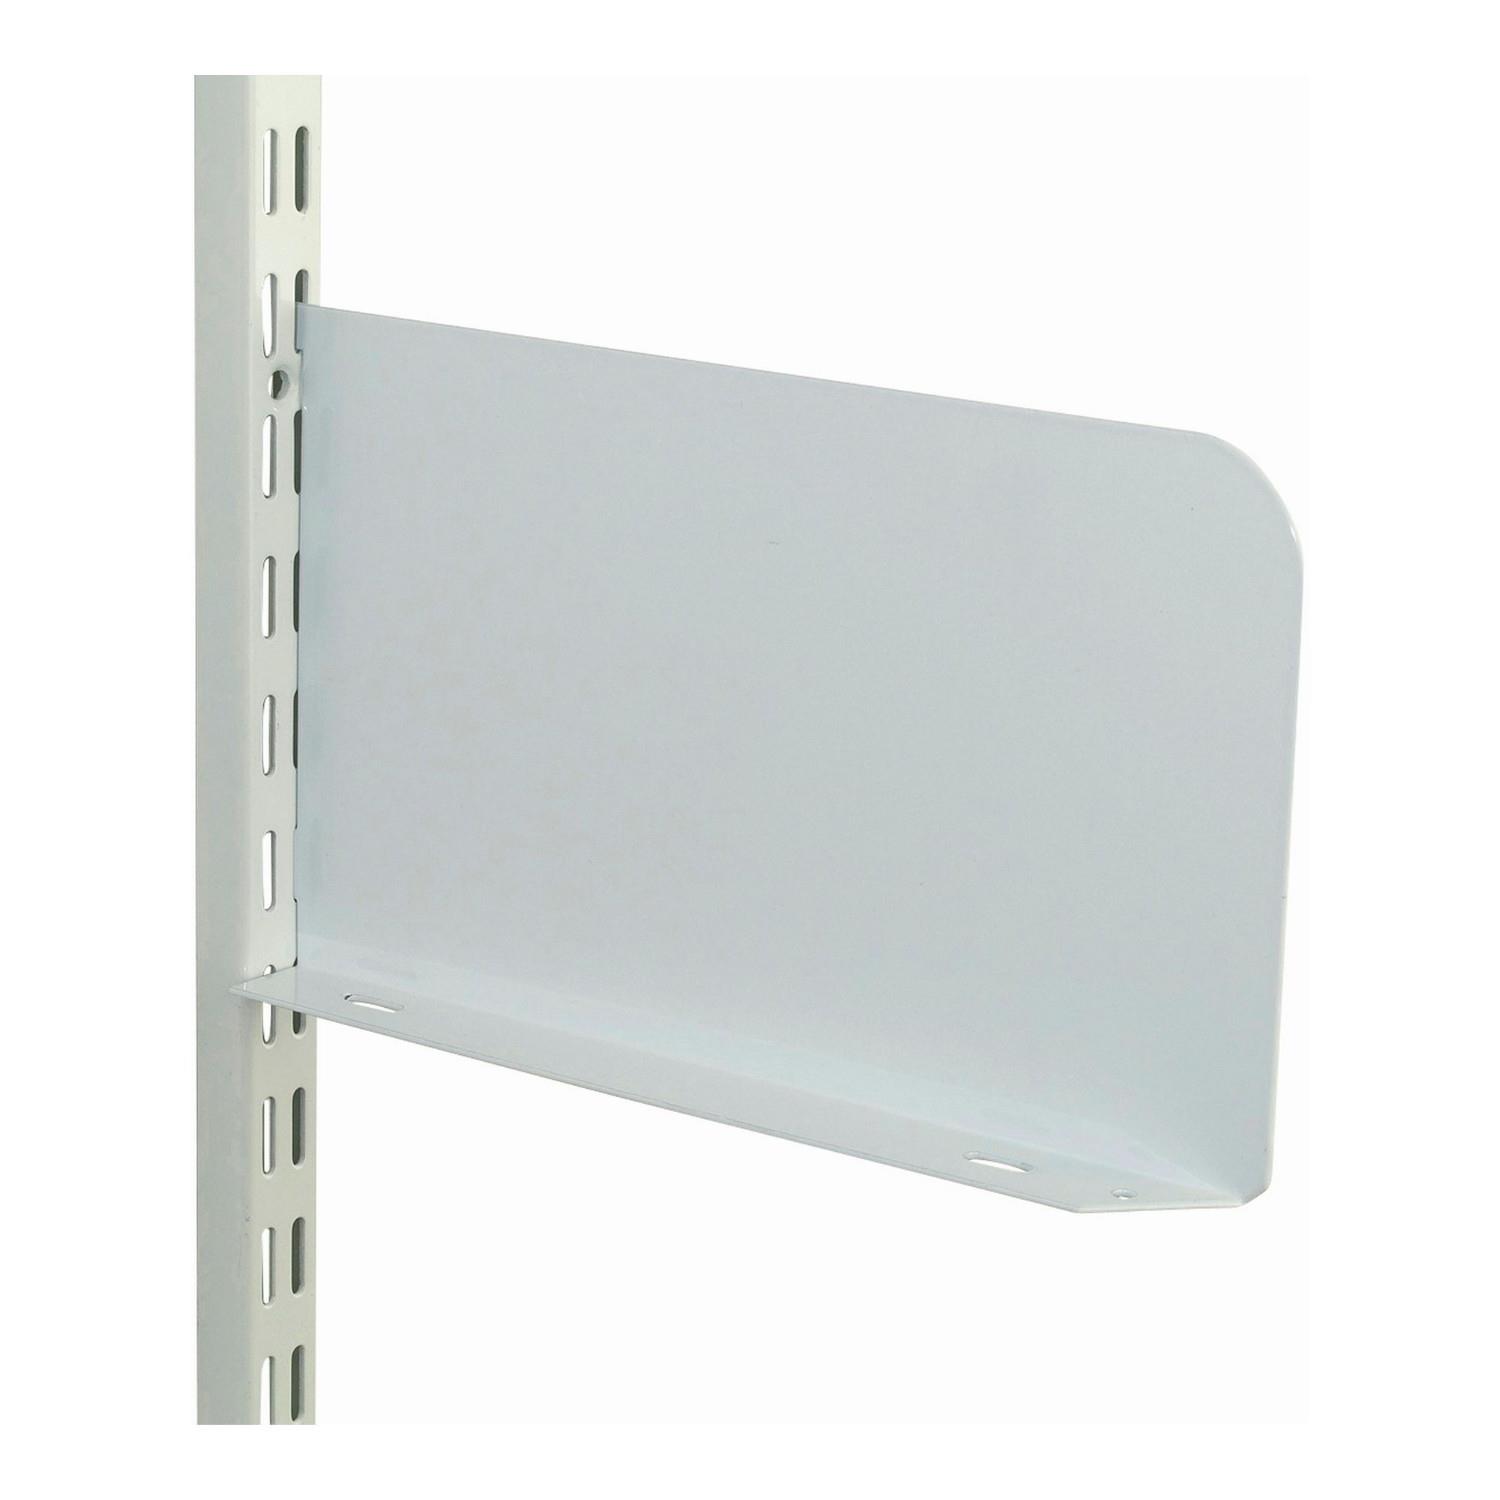 Sapphire DSE200 Shelf End; Twin Slot System; 200mm (8"); White (WH); Pack (2) (1 Pair)